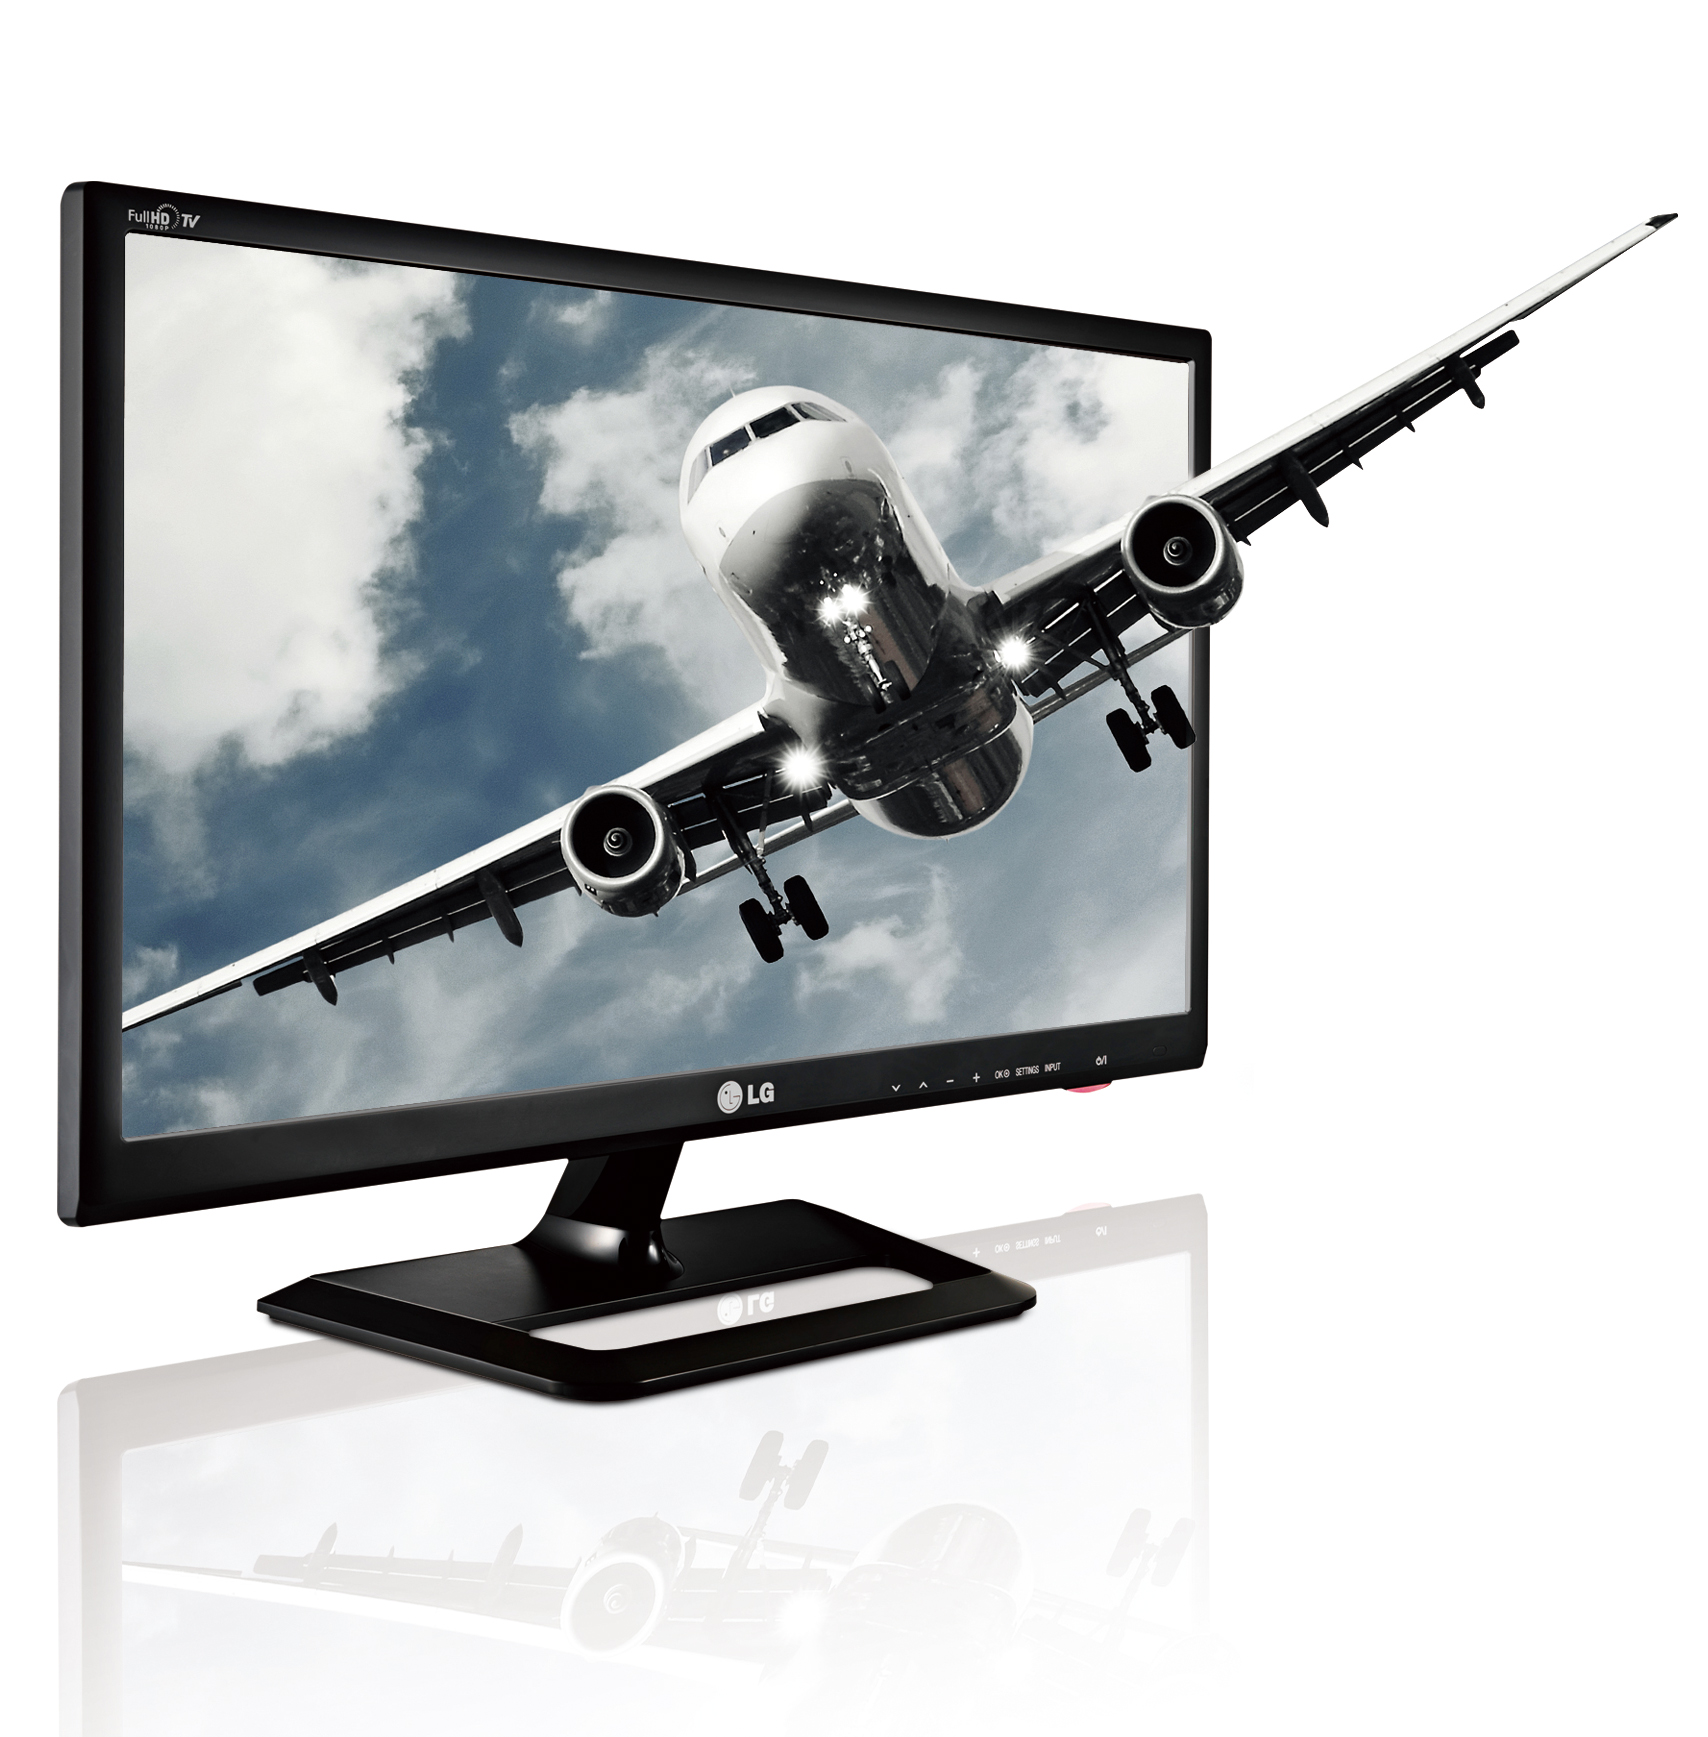 LG’s premium personal TV model DM2752 with the image of a flying aircraft protruding from its display